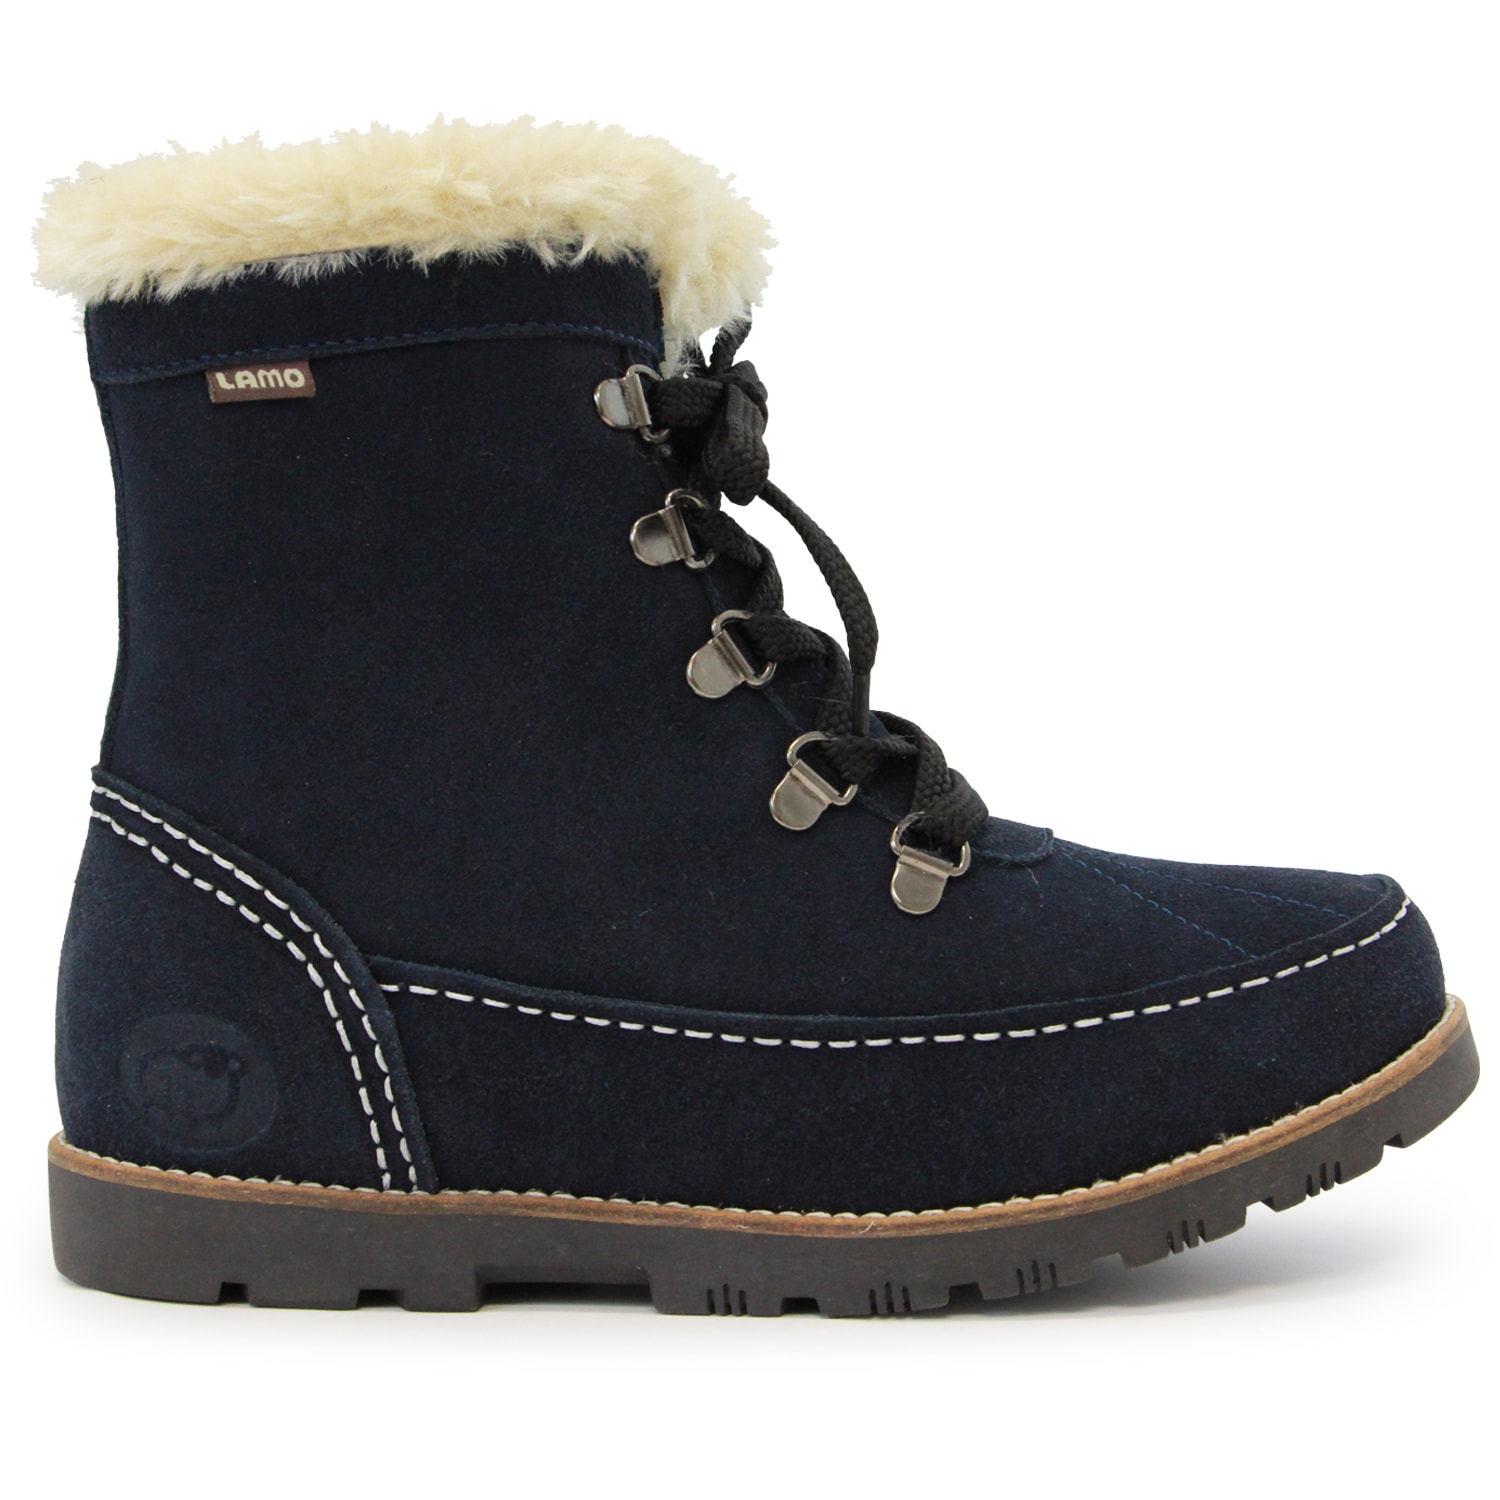 blue suede work boots